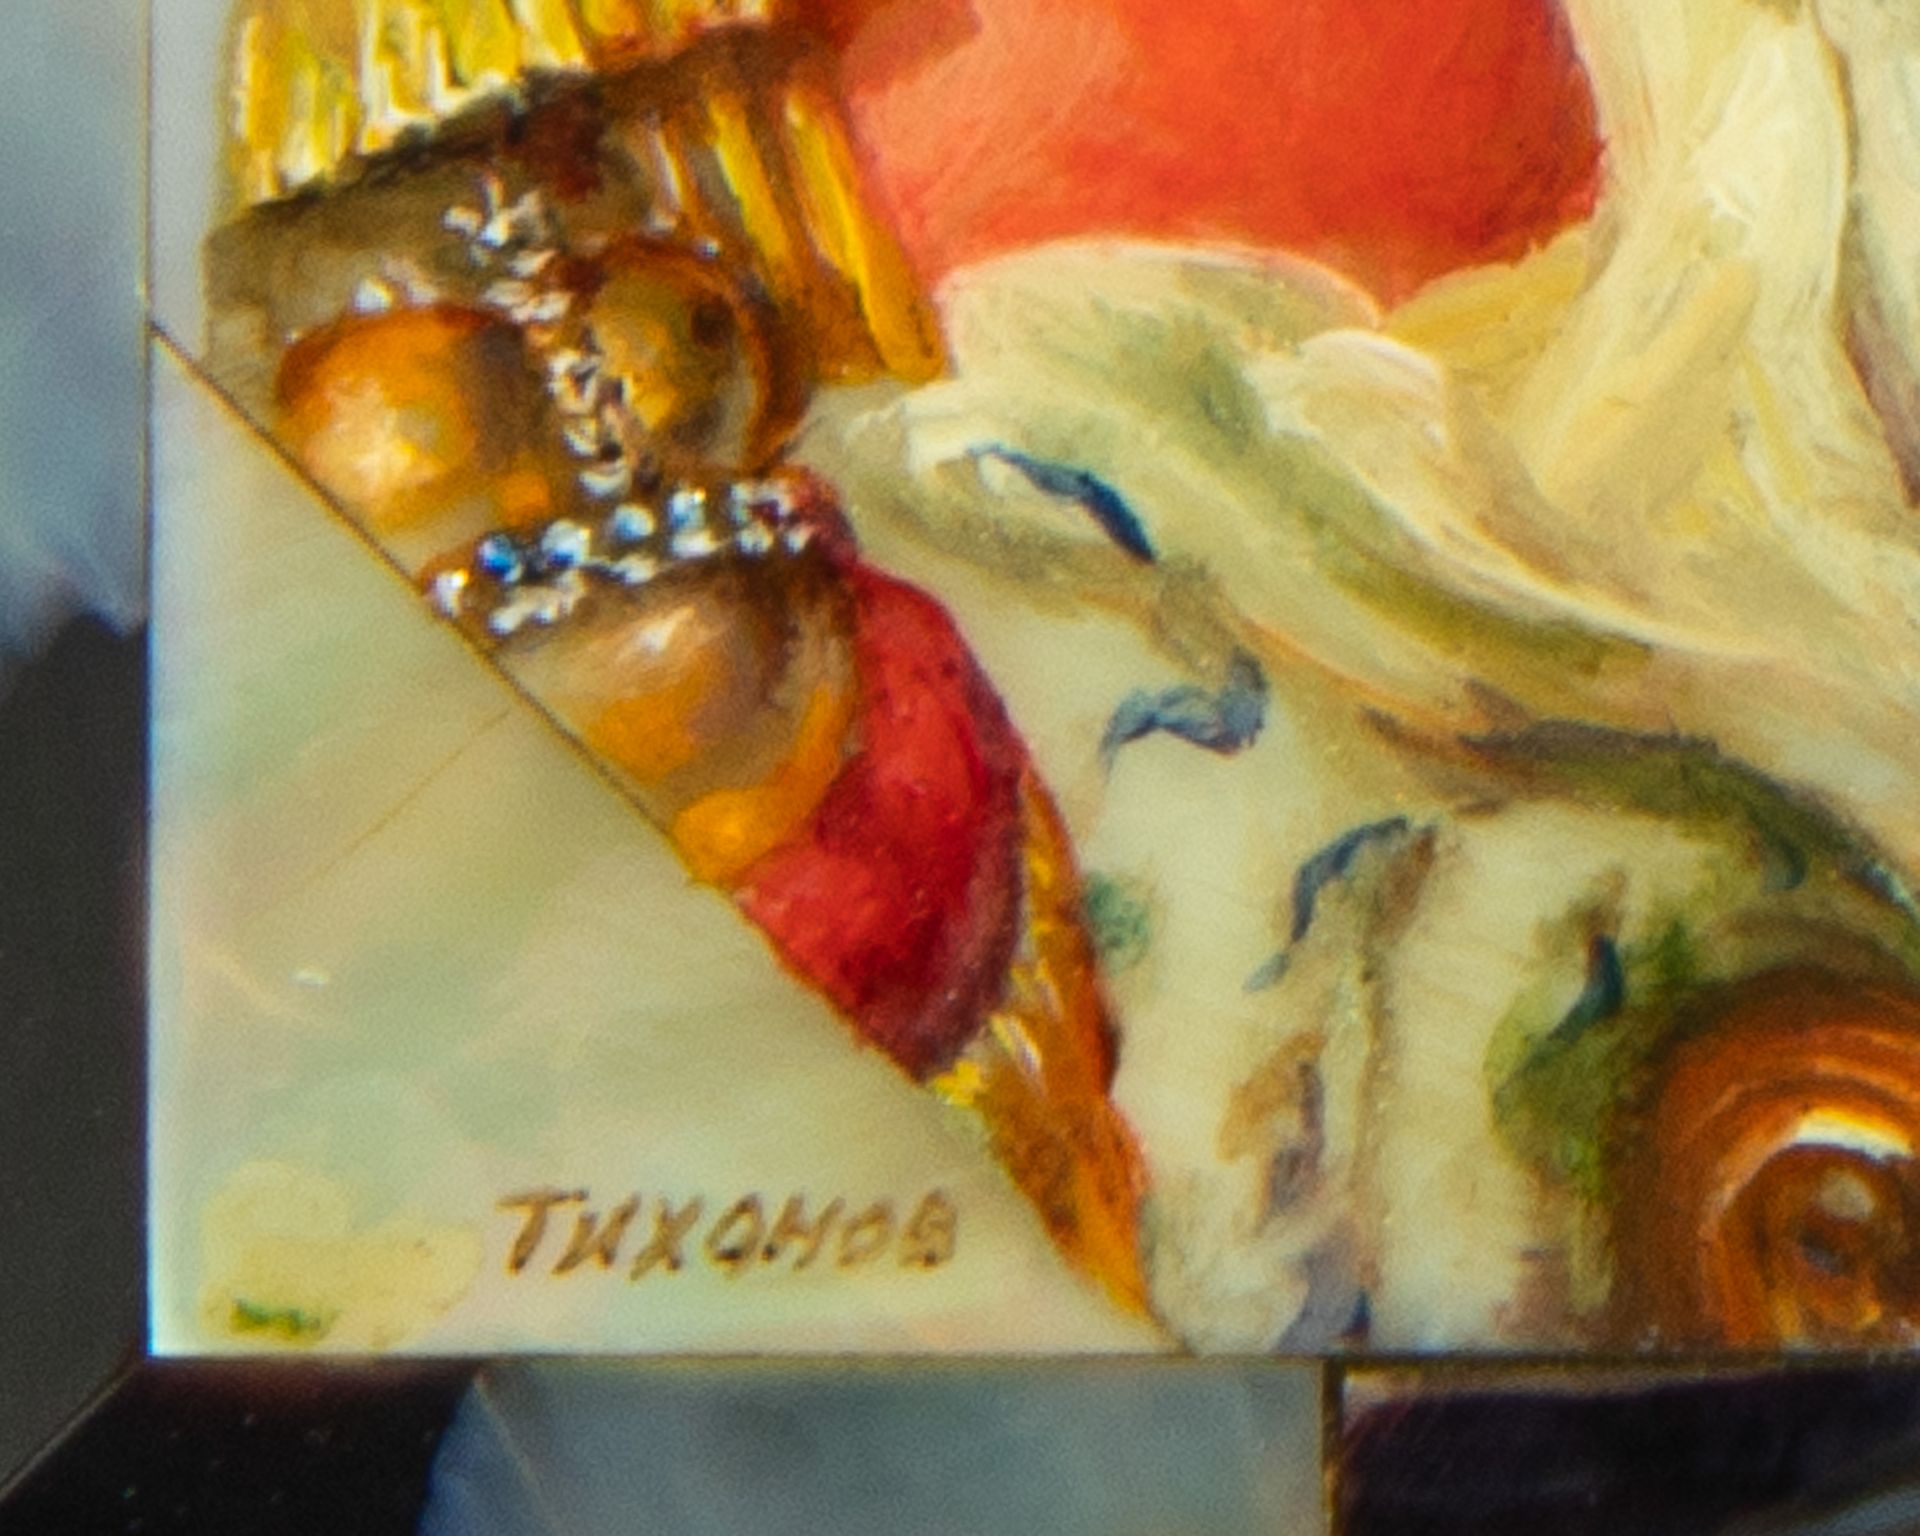 Decorative box, Russia, TIHANOW, Catherine the Great instructing the constitution - Image 4 of 5